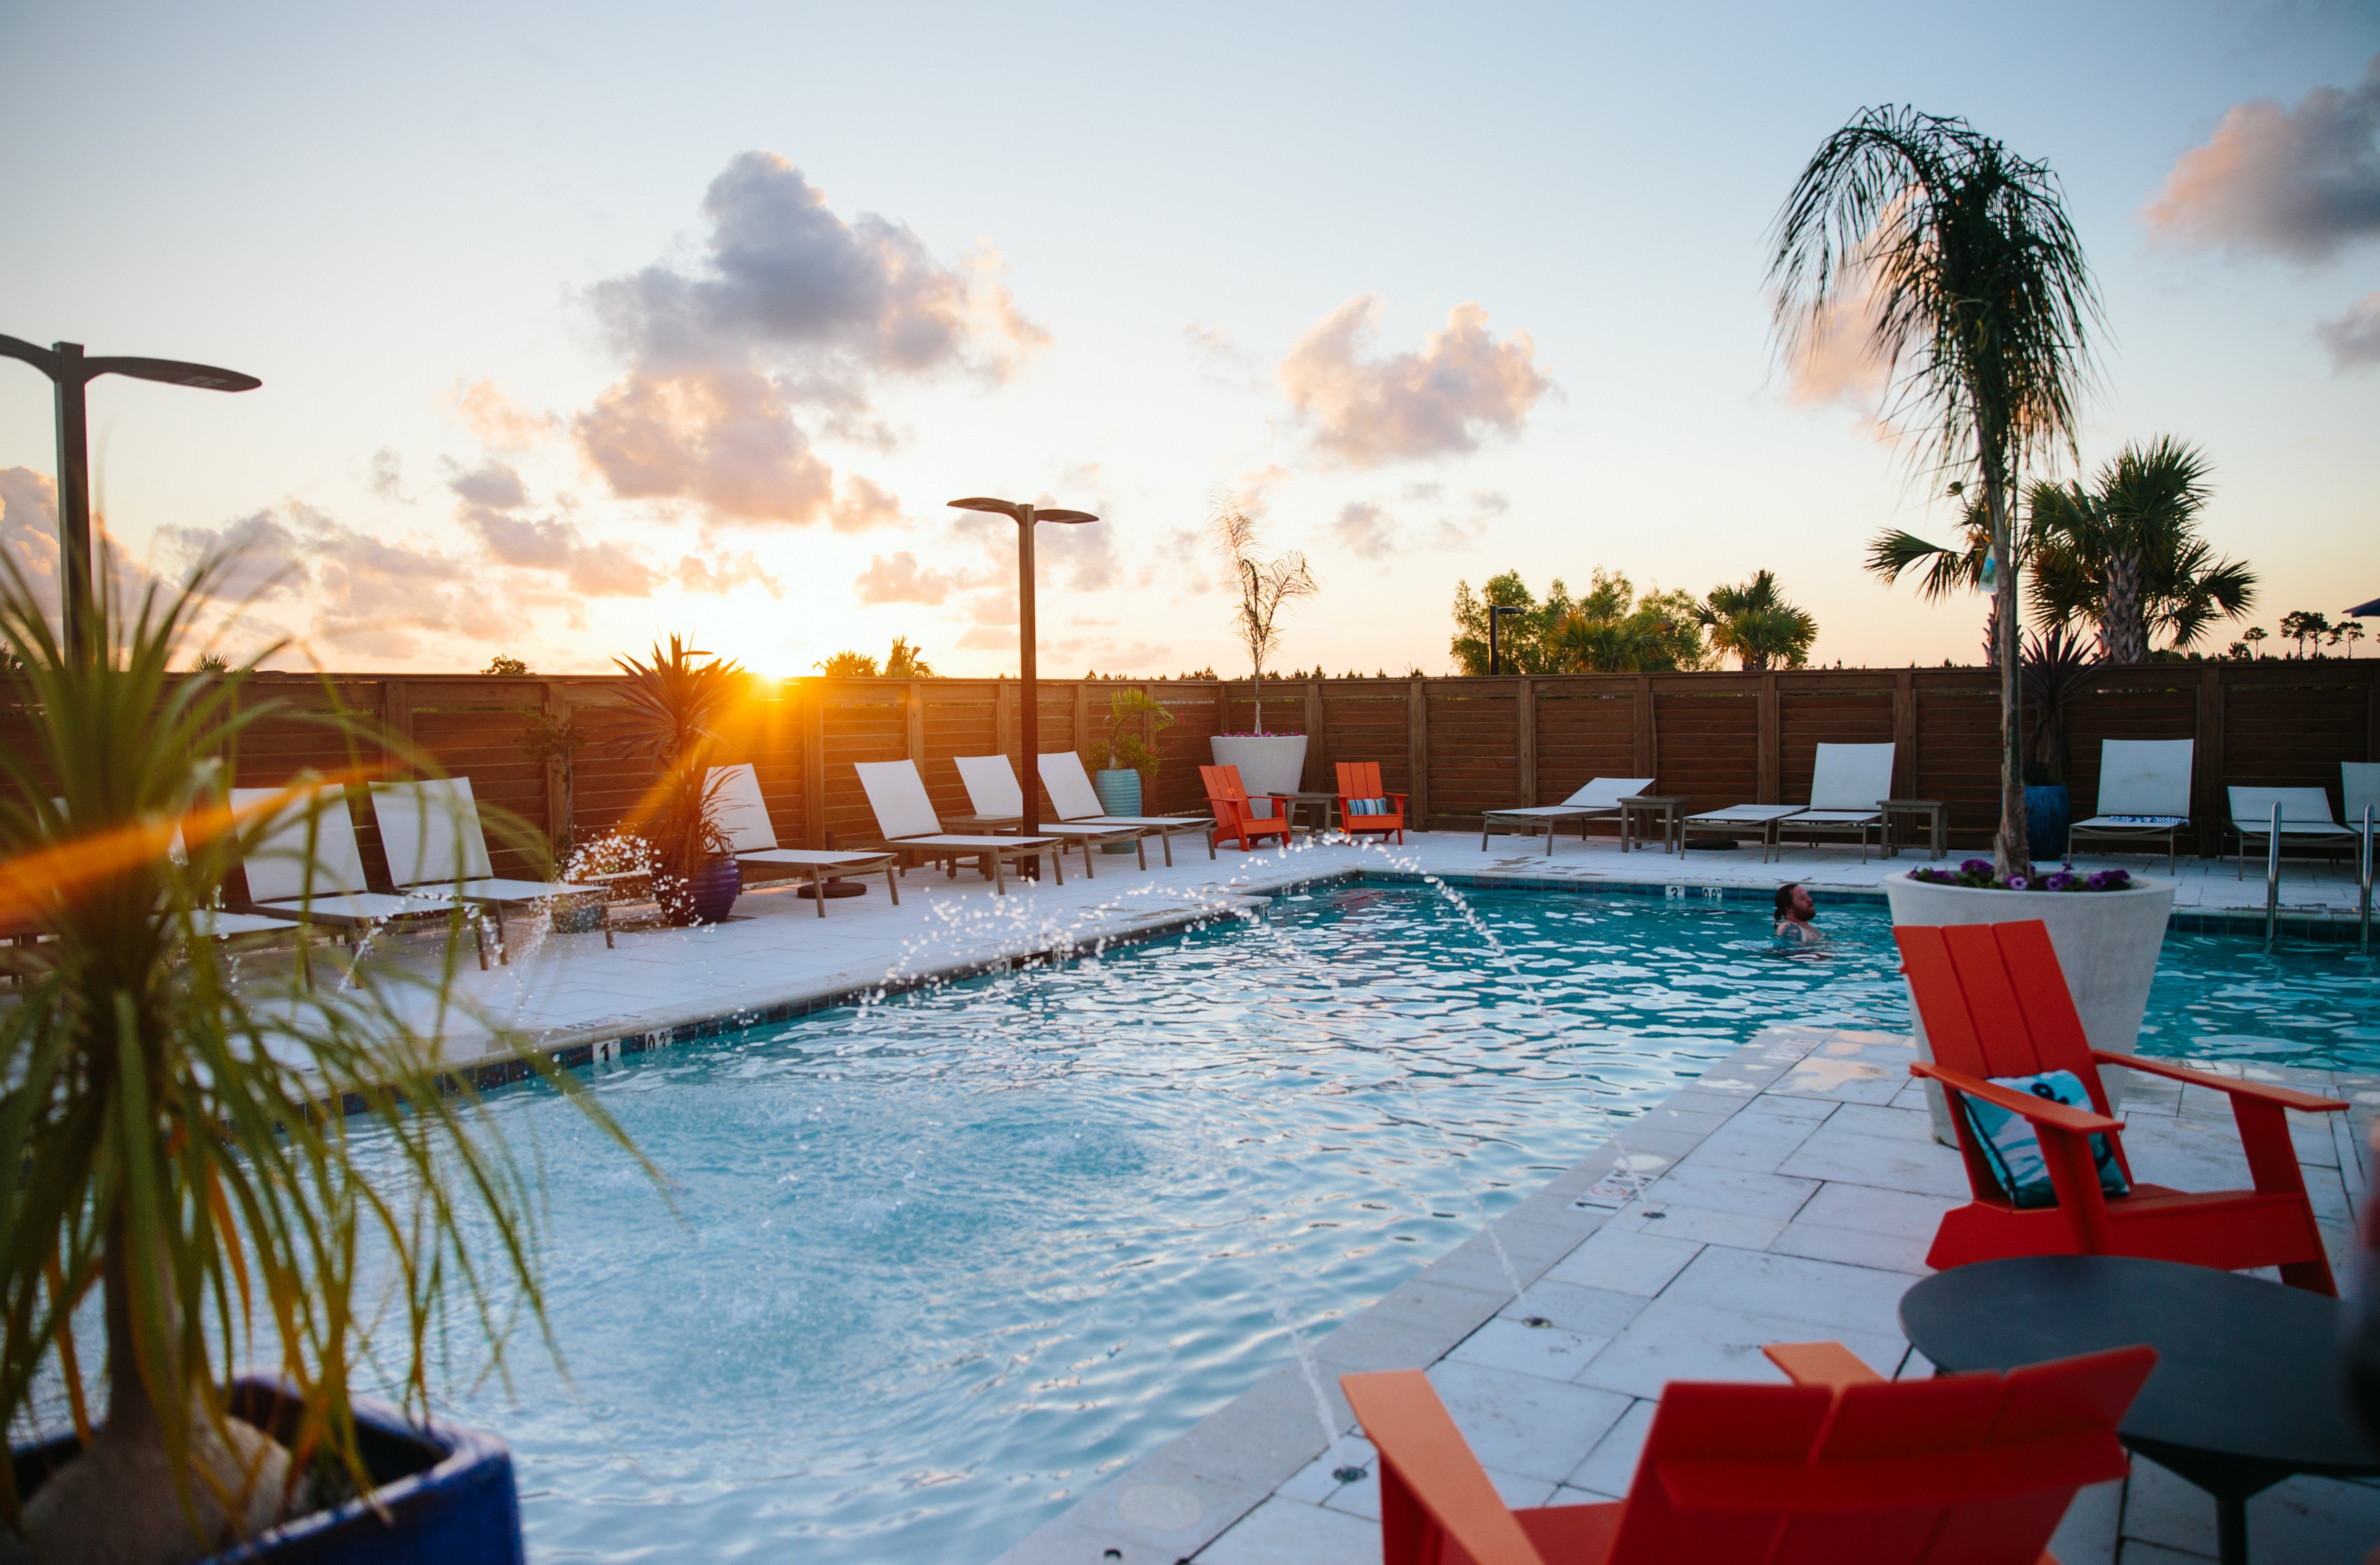 Incredible sunset views from our outdoor pool